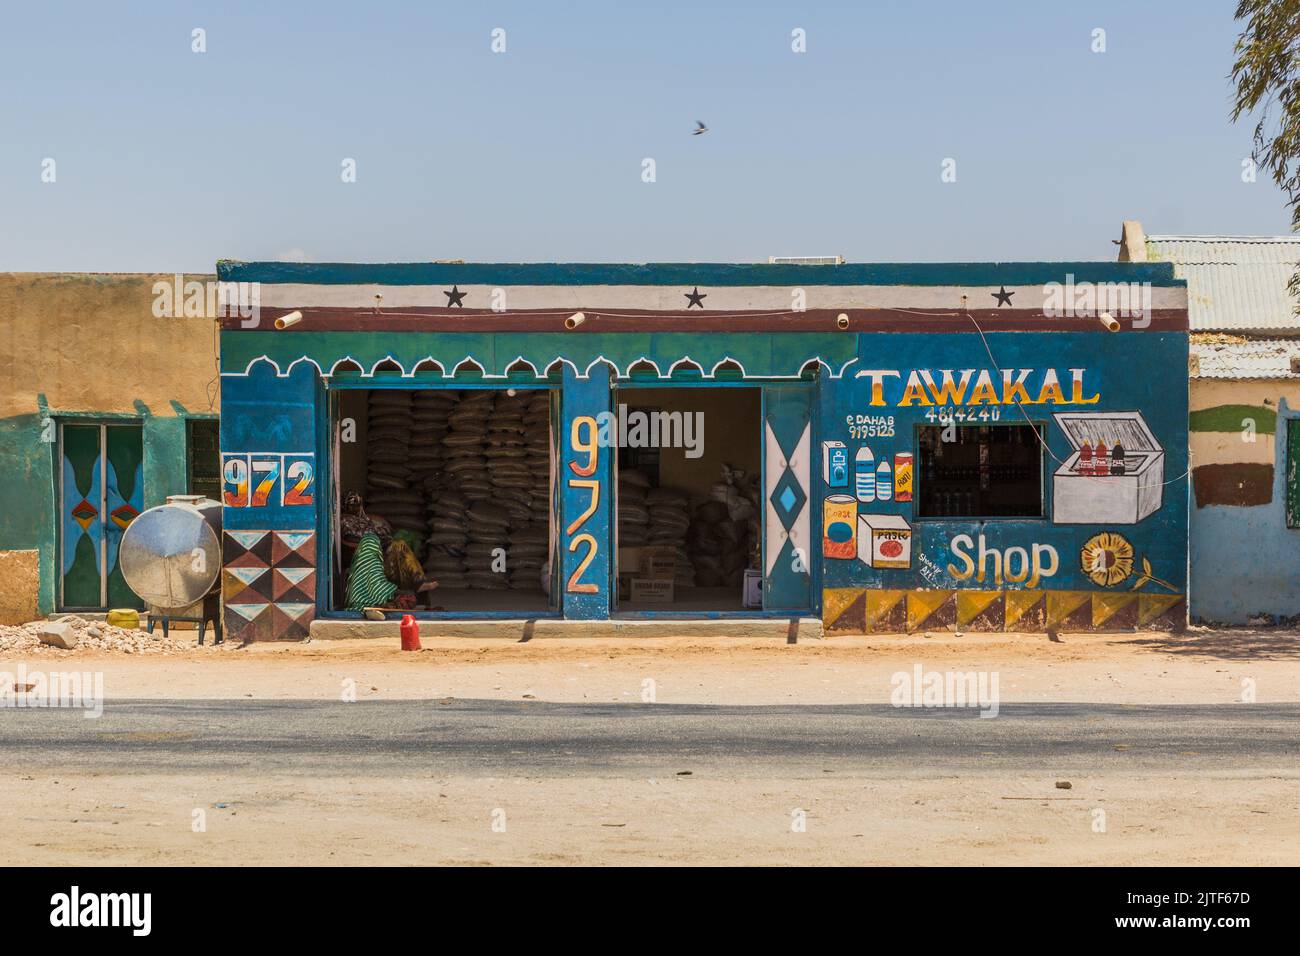 HARGEISA, SOMALILAND - APRIL 12, 2019: Colorfuly painted shop in Hargeisa, capital of Somaliland Stock Photo